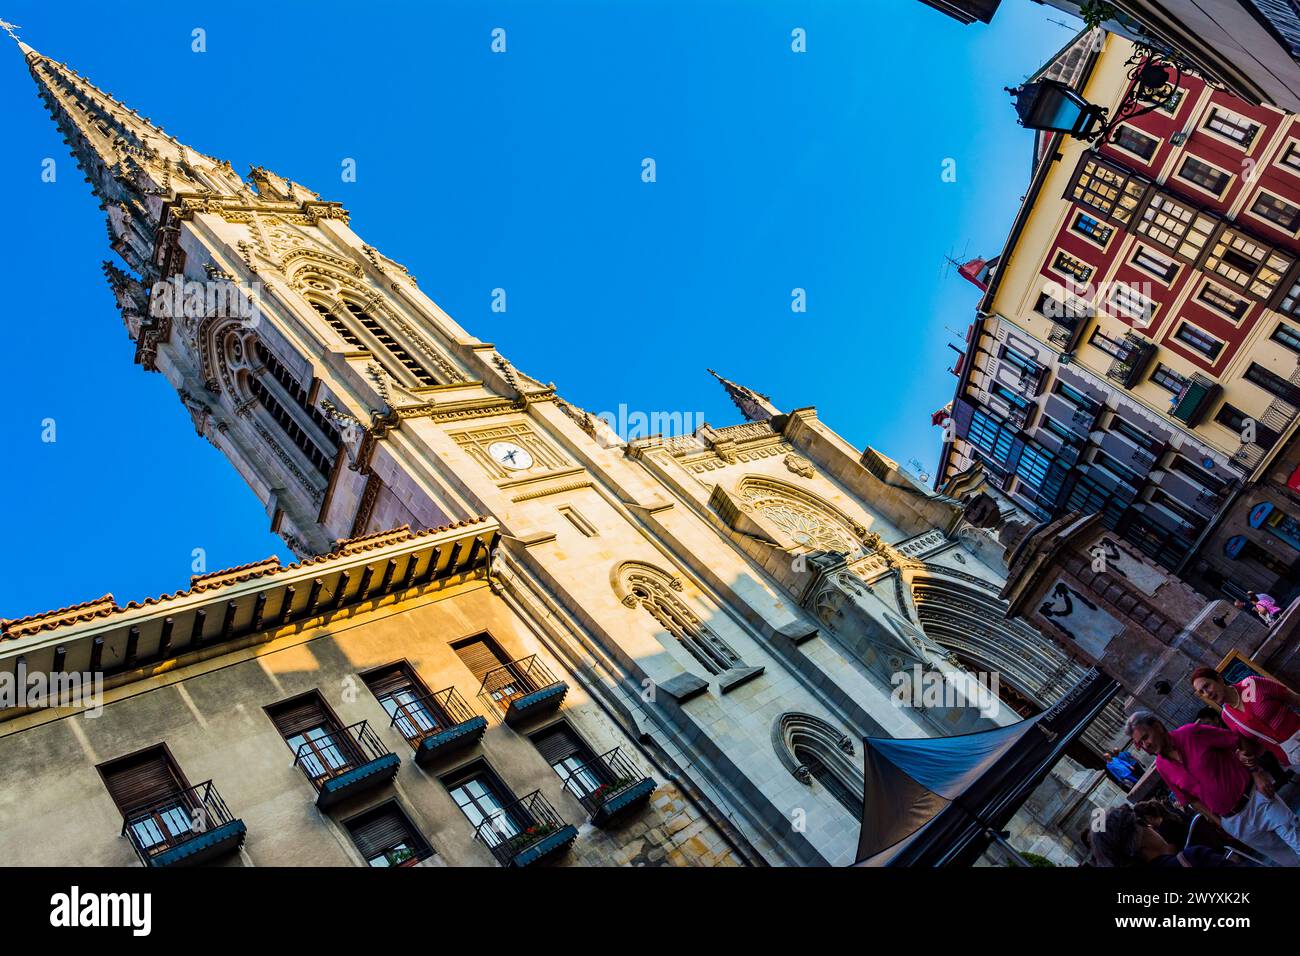 Santiago Cathedral. Its origins probably date to well before the foundation of the city in 1300. Bilbao, Biscay, Basque Country, Spain, Europe Stock Photo